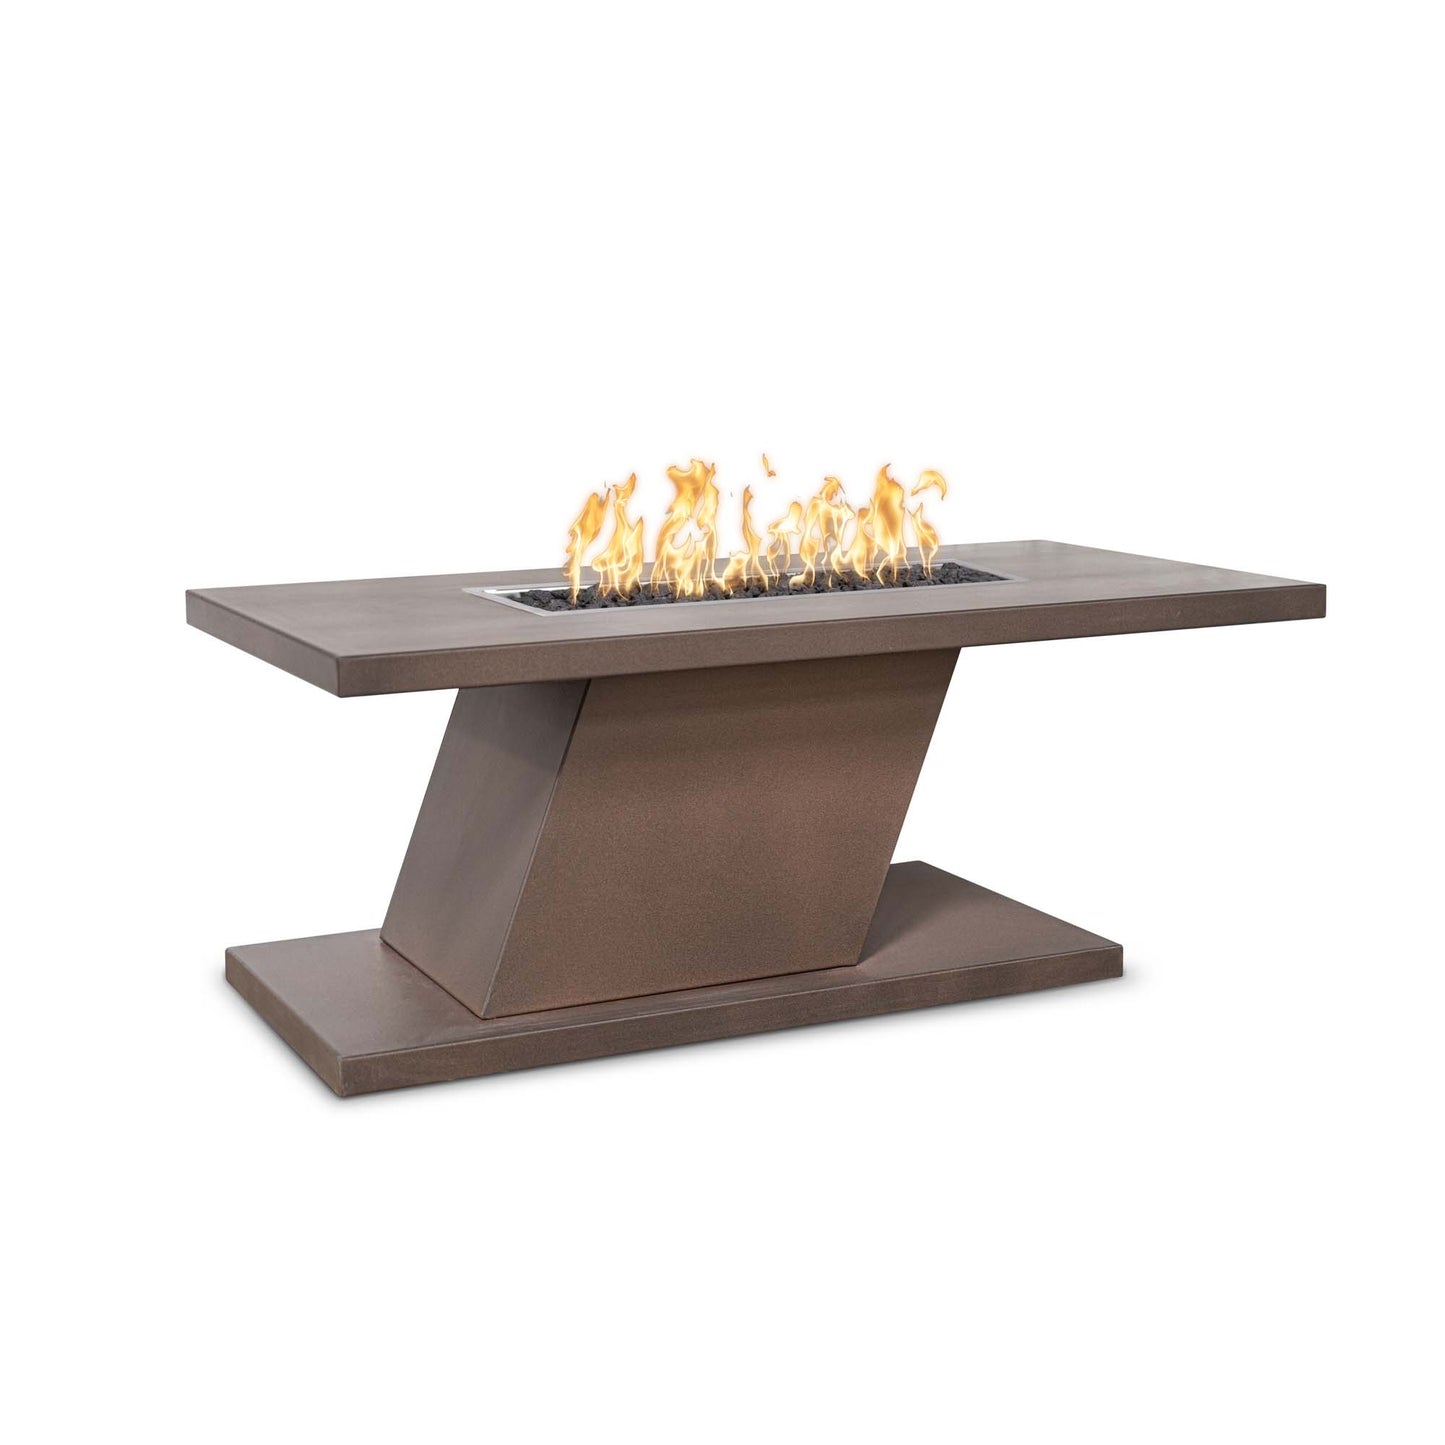 Imperial Fire Pit Table 60" - Electronic Ignition